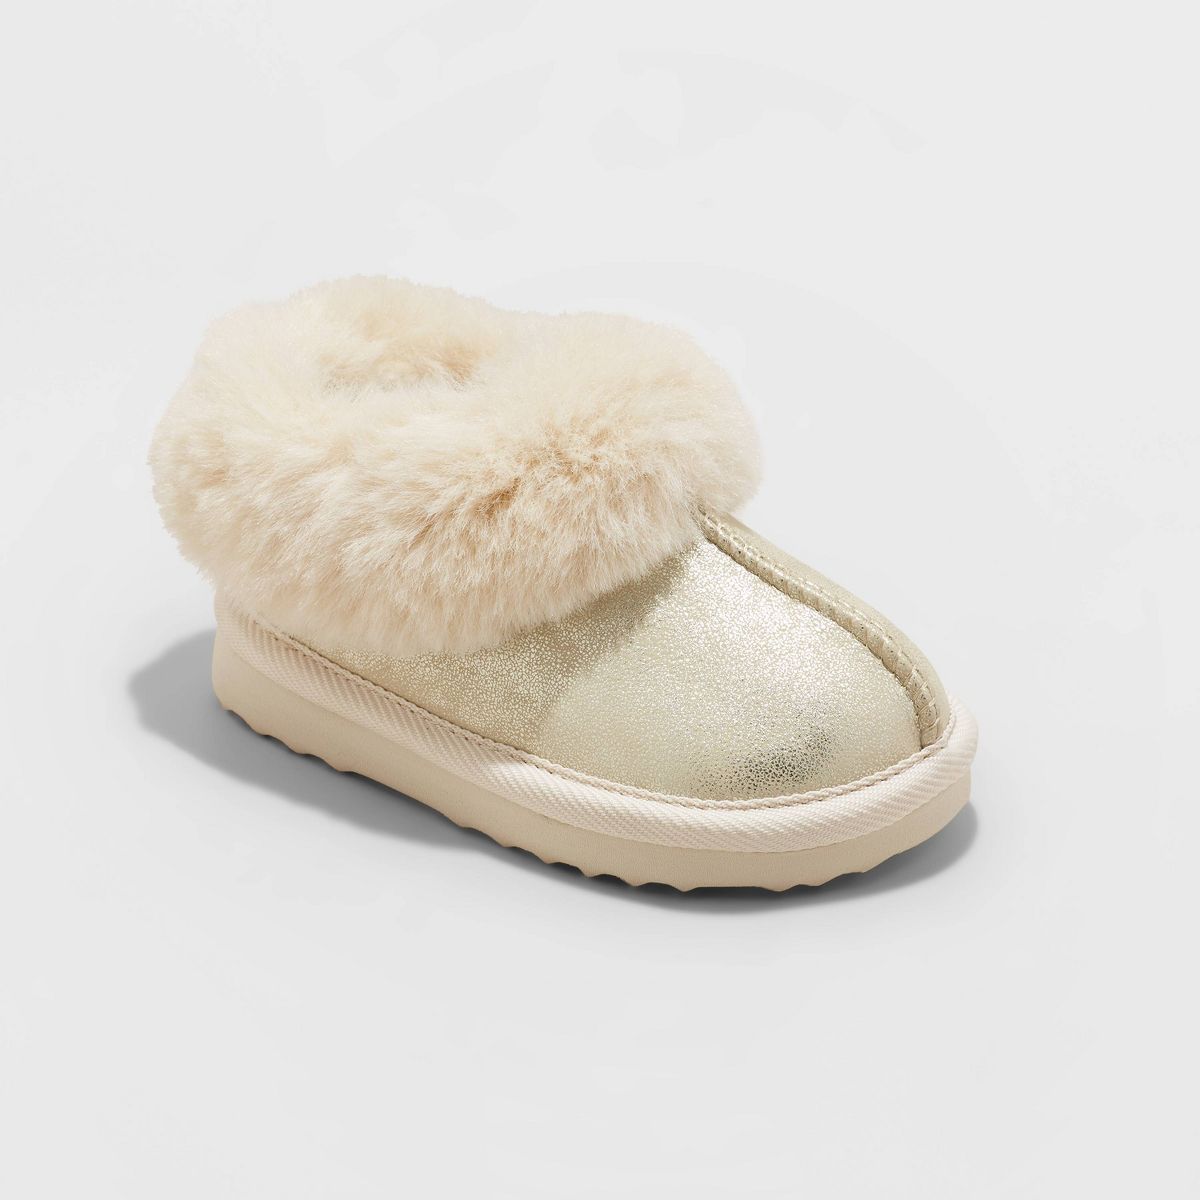 Toddler Callie Faux Fur Cuff Bootie Slippers - Cat & Jack™ | Target